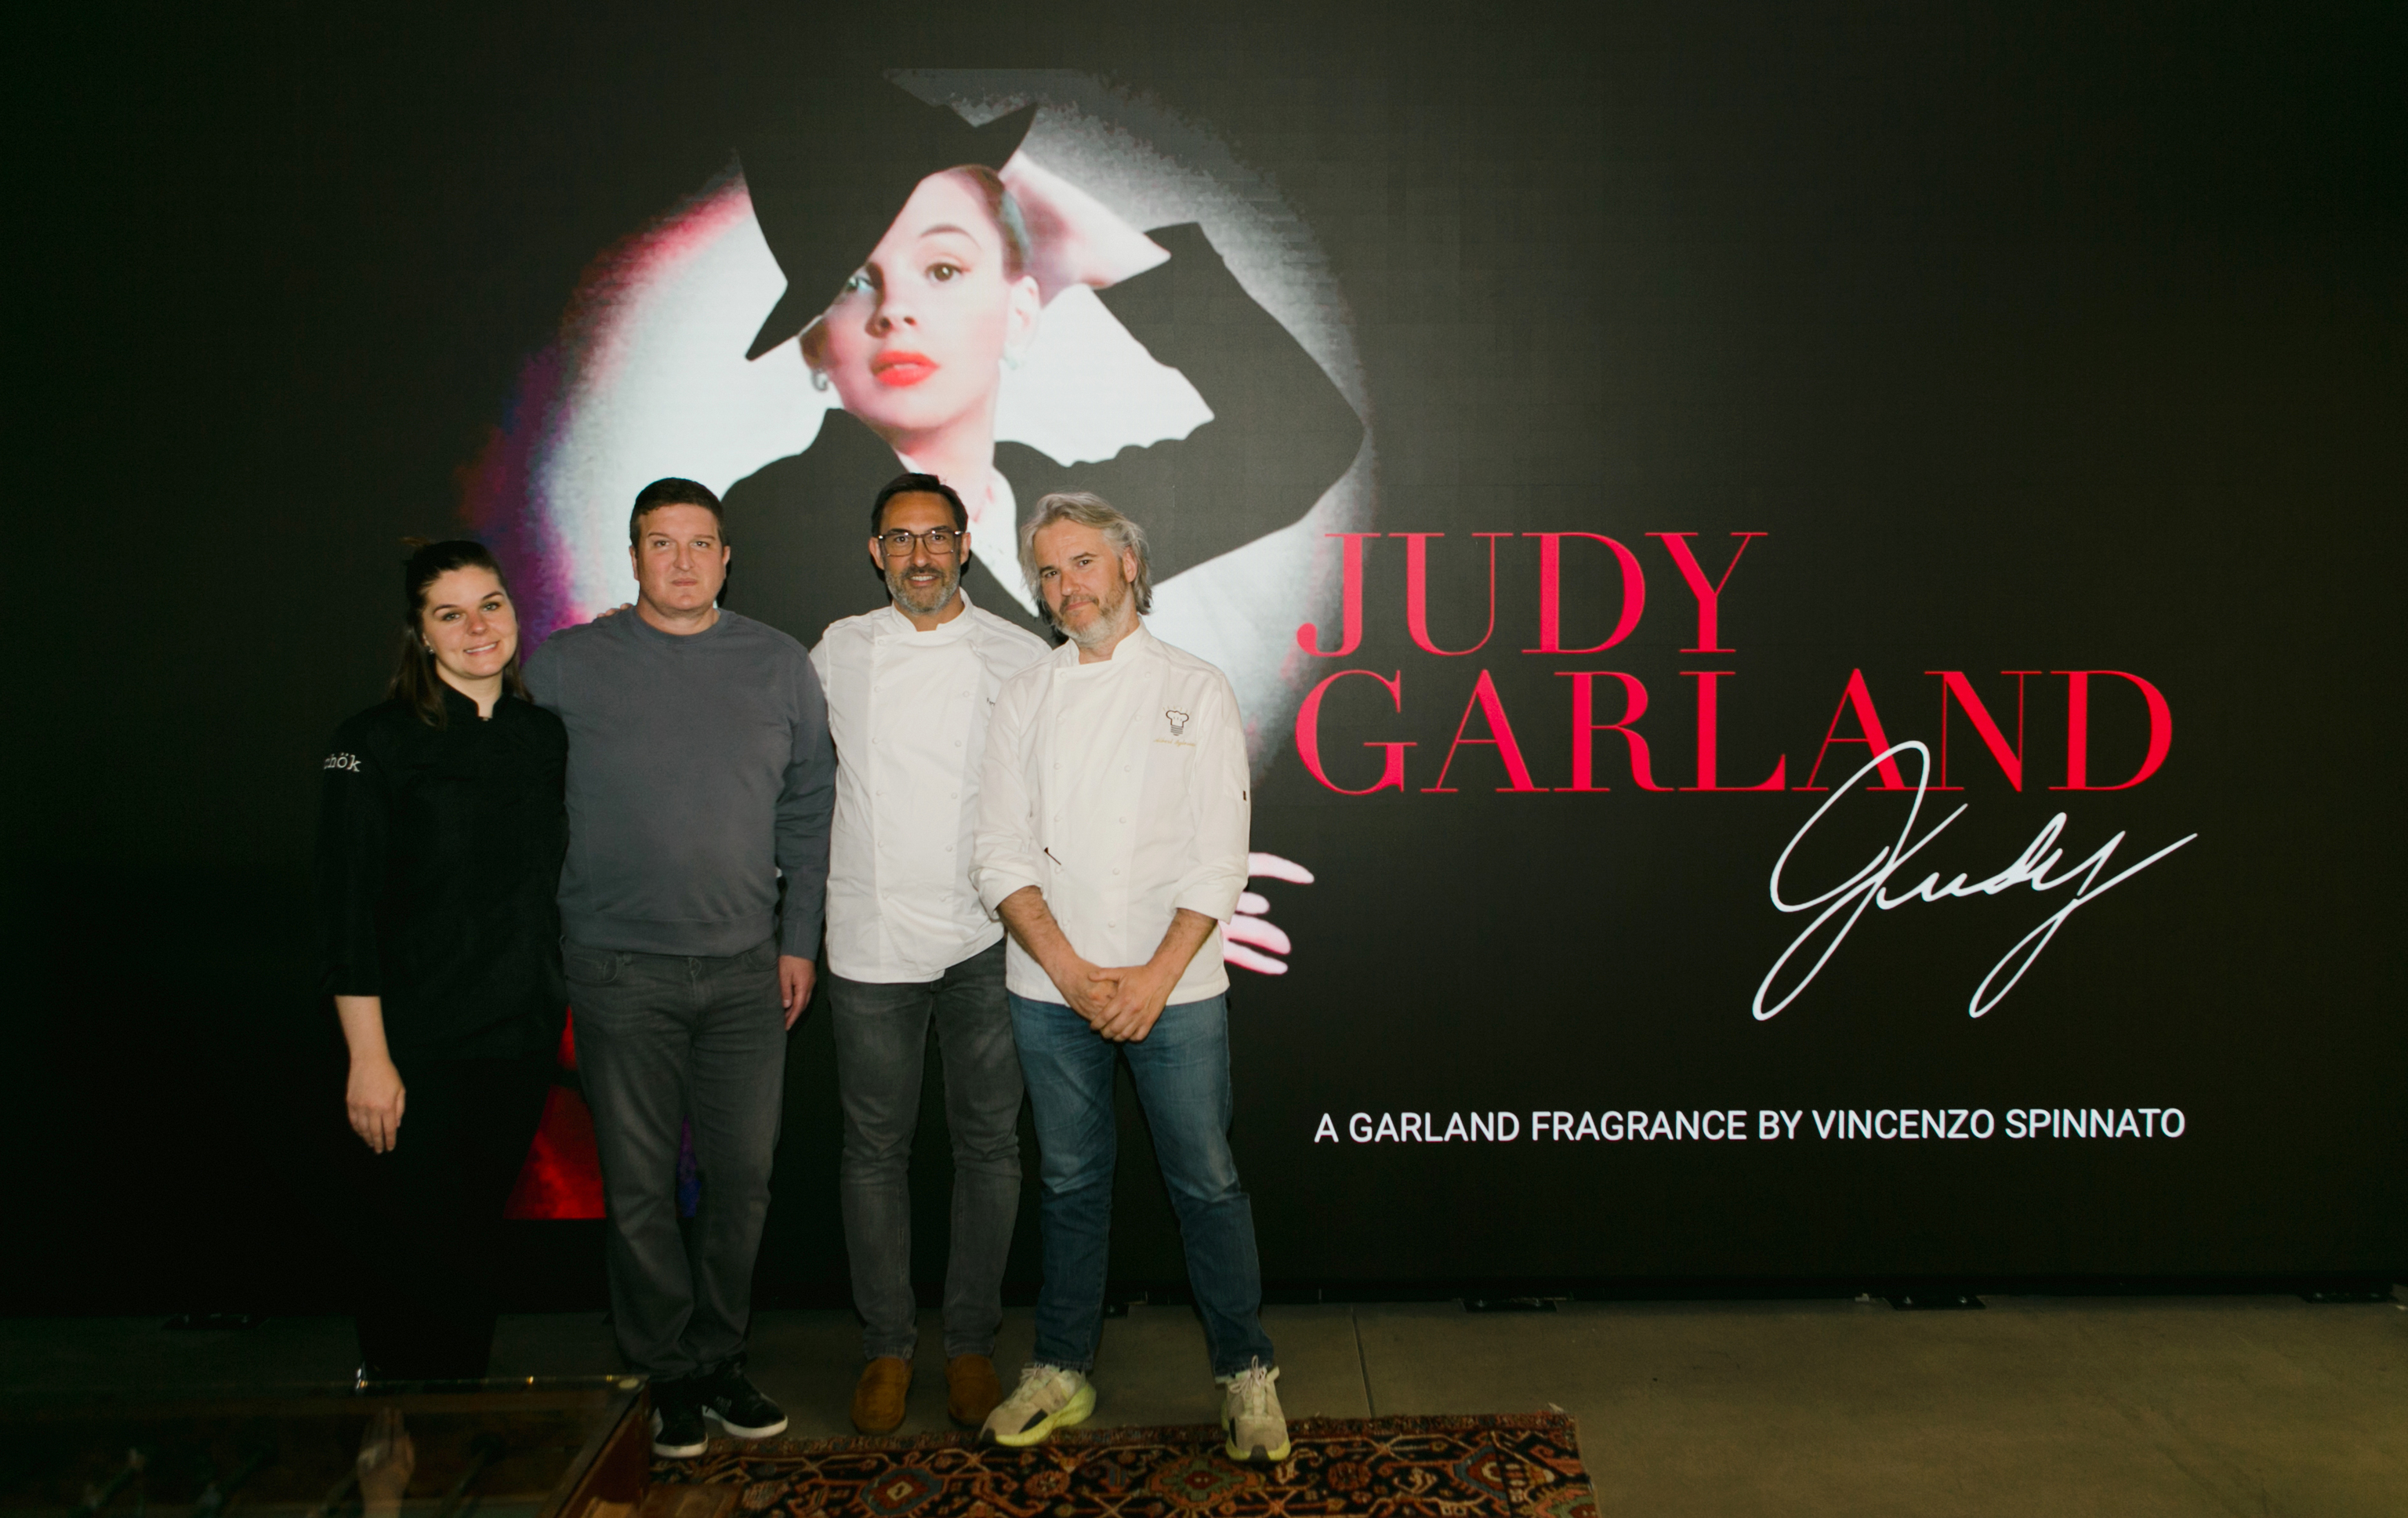 Fernando Madrid (second from right), along with perfumer Vincenzo Spinato (second from left) and Choc are part of the team.